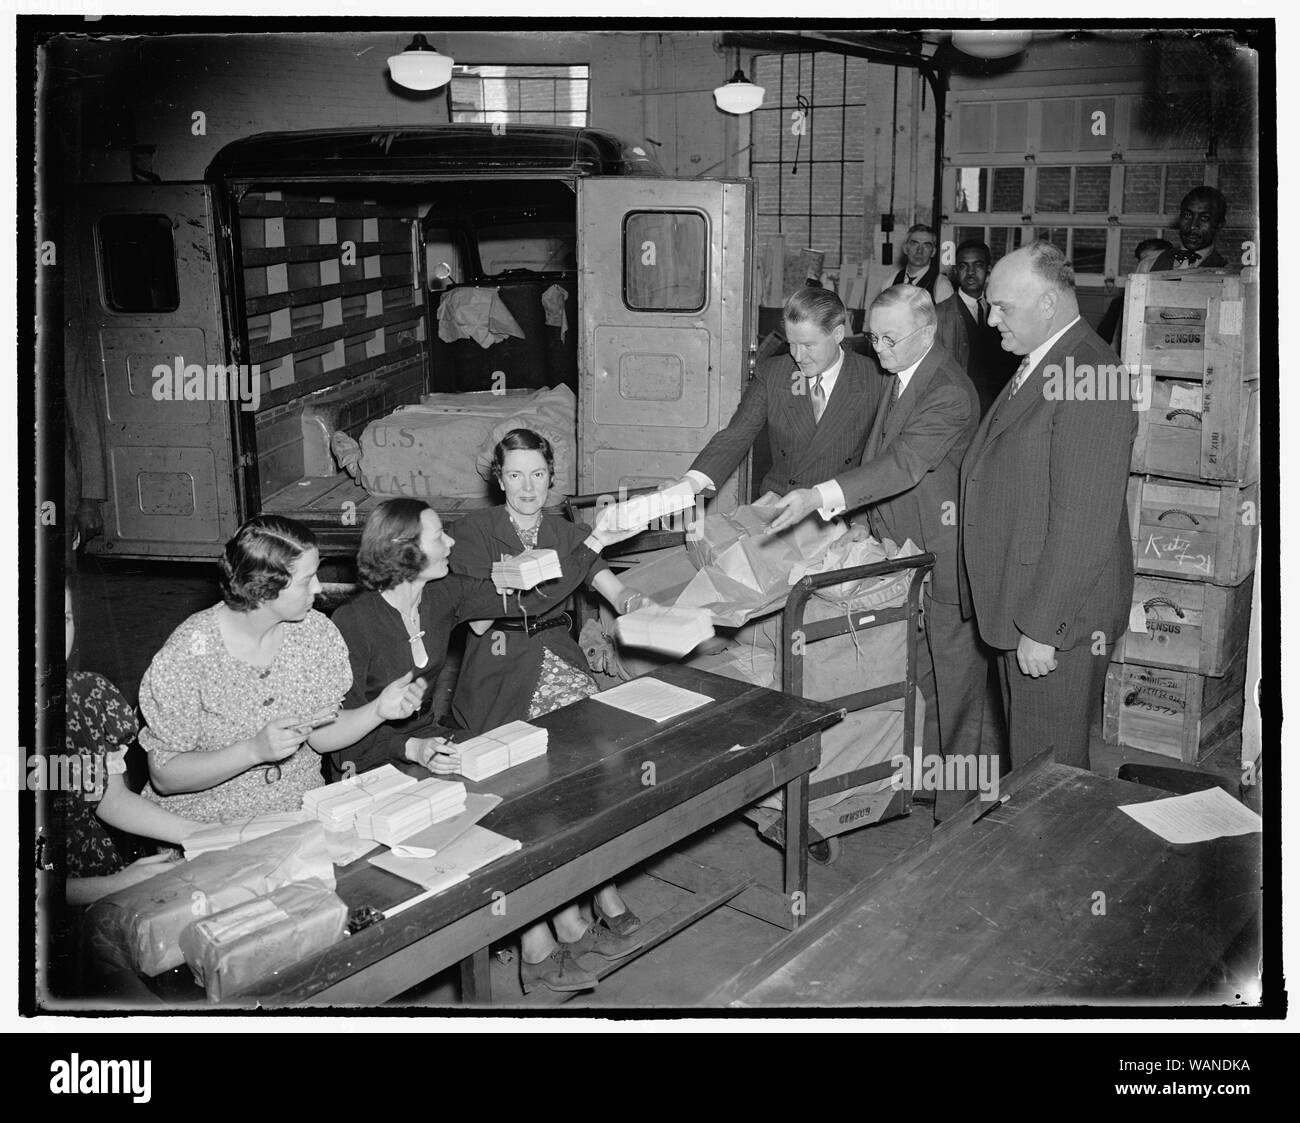 Counting of returns from unemployment questionnaire gets under way. Washington, D.C., Nov. 24. Tabulation of the returns from the millions of unemployment questionnaires mailed out last week was started today when final instructions were issued by John D. Biggers, Unemployment Census Director, to the hundreds of clerks employed to accomplish the huge task. Left to right: Director John D. Biggers; William L. Austin, Director of the Census; and Frederick A. Gosnell, representing the Lost Census Bureau at the Unemployment Census Tabulating, 11/24/37 Stock Photo